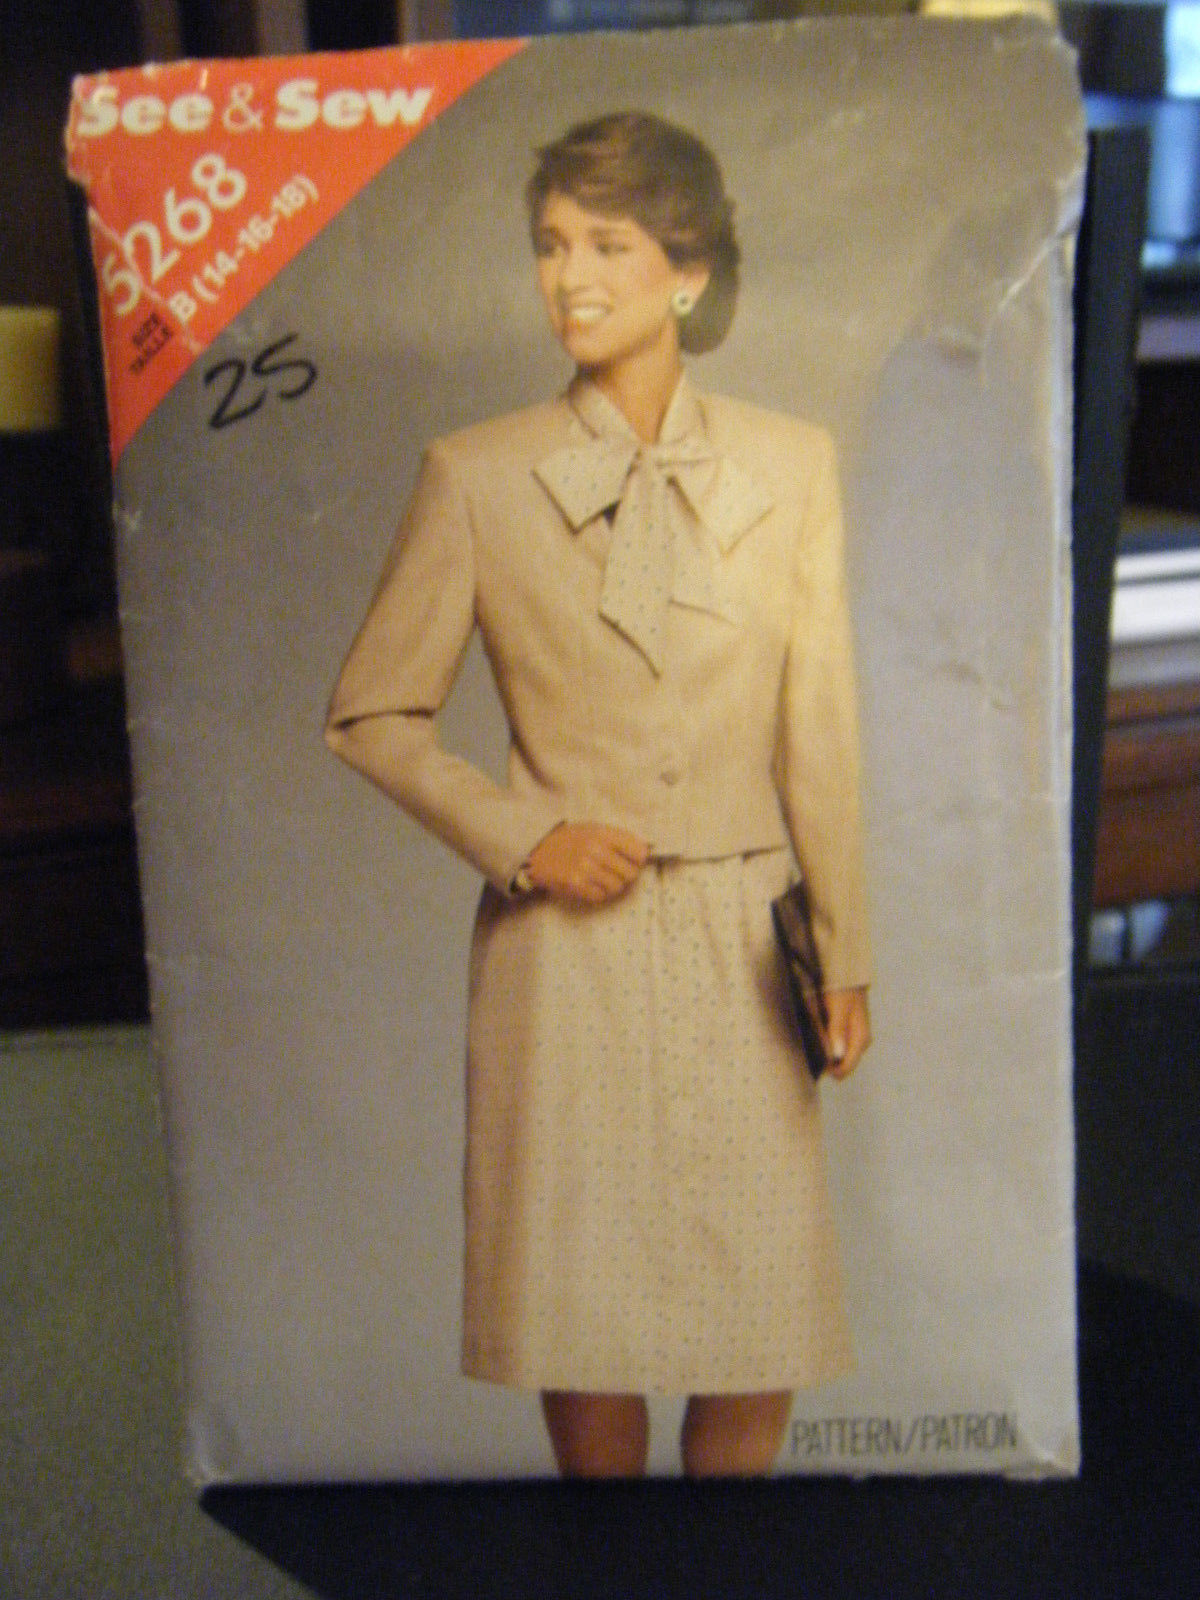 Primary image for Butterick 5268 Misses Unlined Jacket & Dress w/Neckline Tie Pattern - Size 14